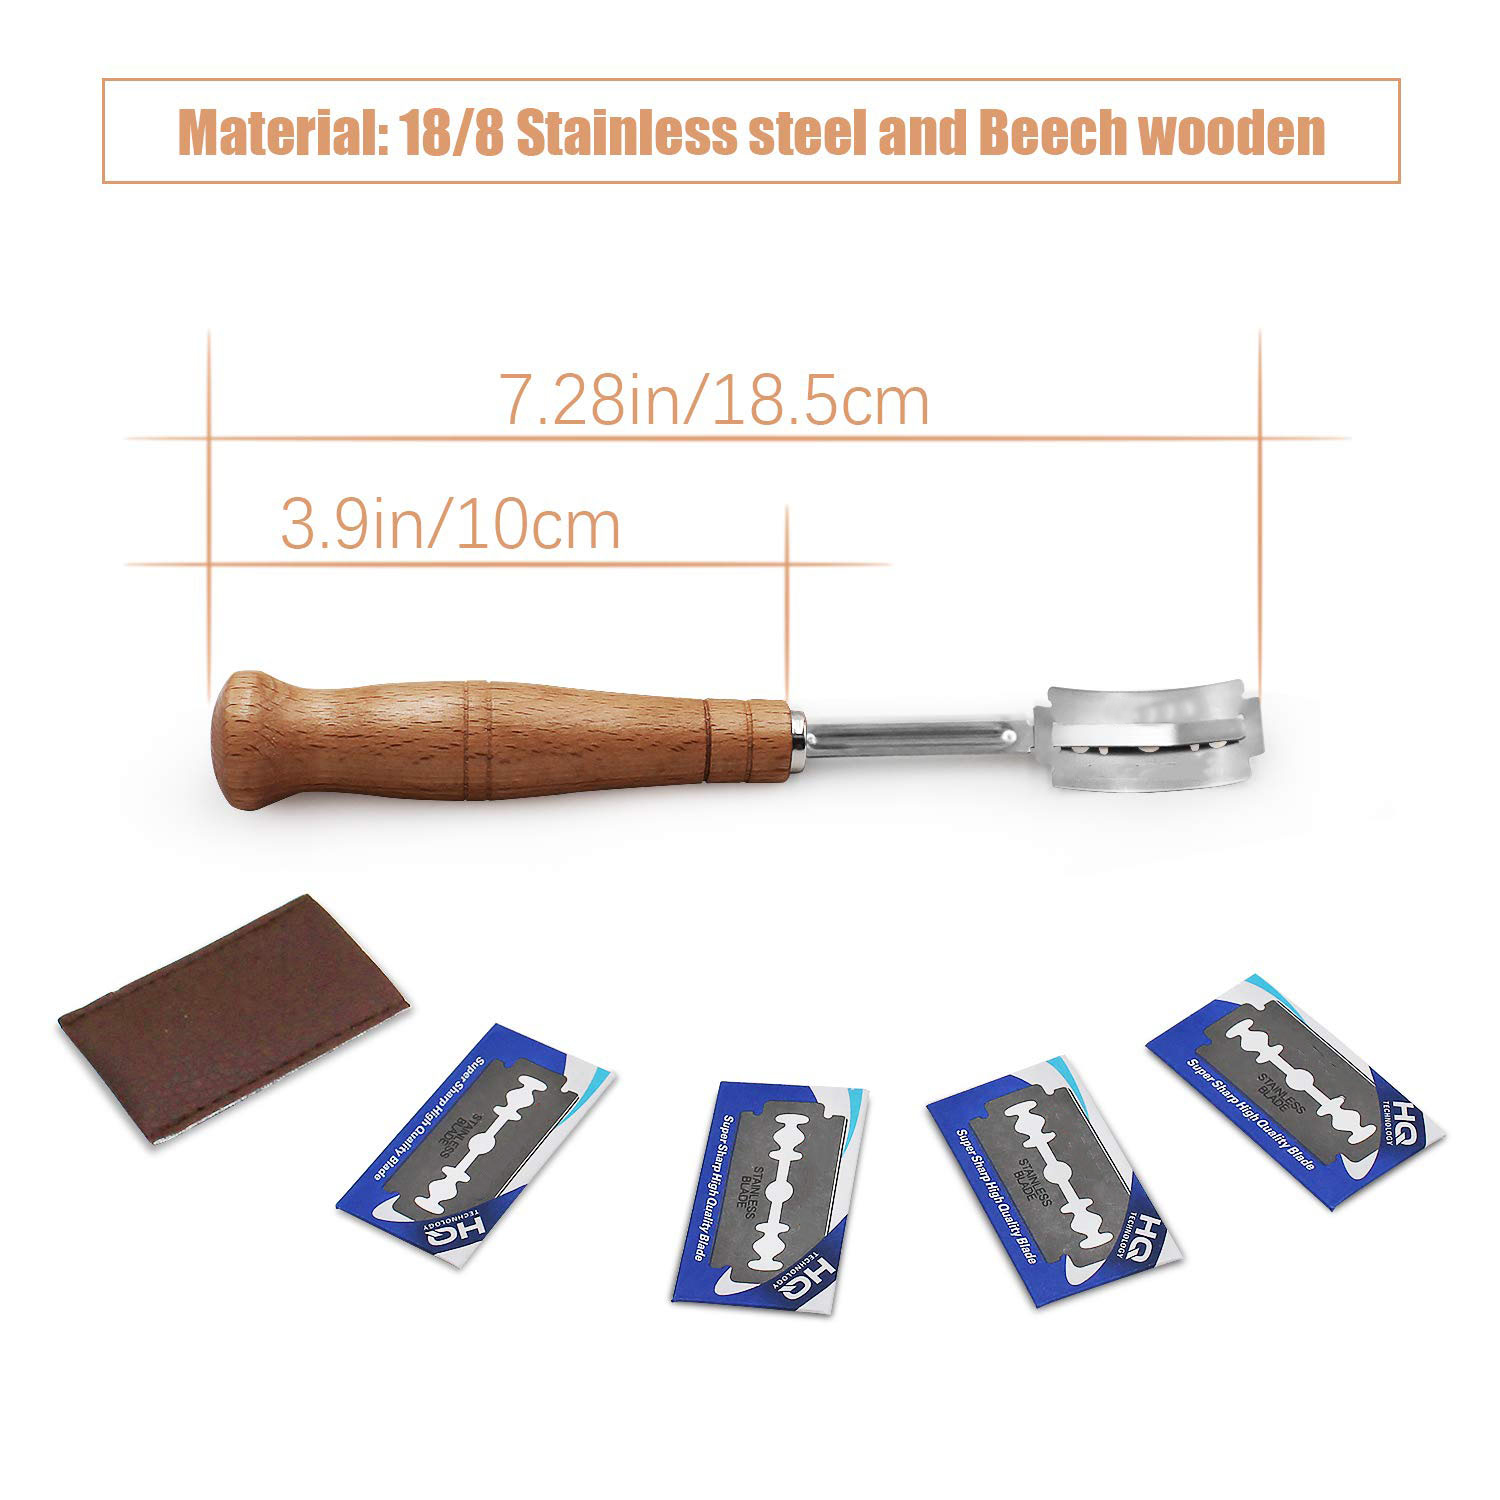 Bread Cutter Bread Lame Bread Scoring Tool Dough Bread Scoring Knife Tool  With 5 Blades & Leather Cover